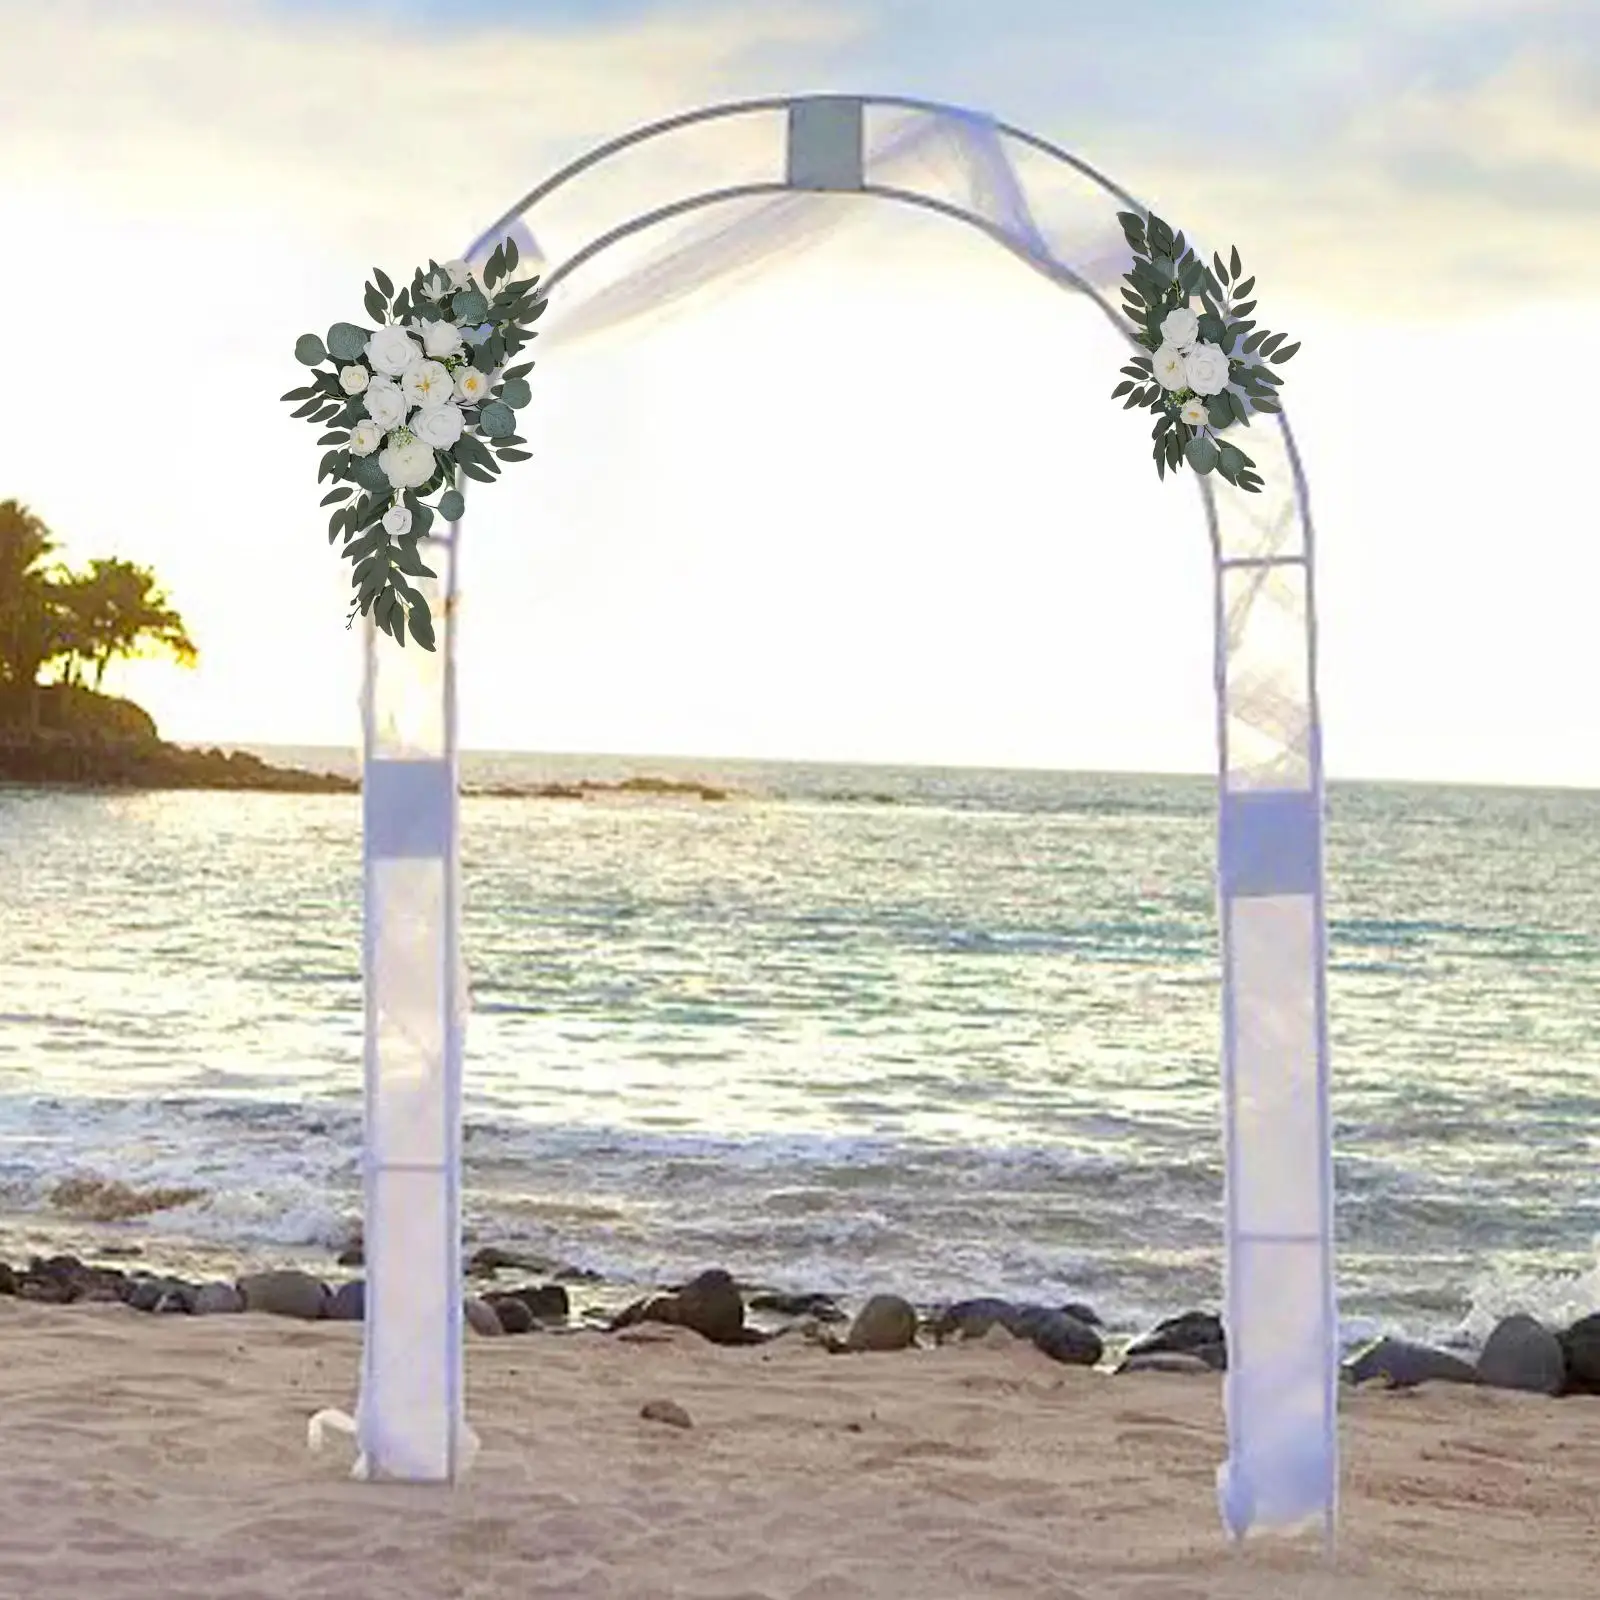 2x Artificial Wedding Arch Flowers White Flowers Green Leaves Ceremony Signs for Backdrop Arrangement Ceremony Wedding Home